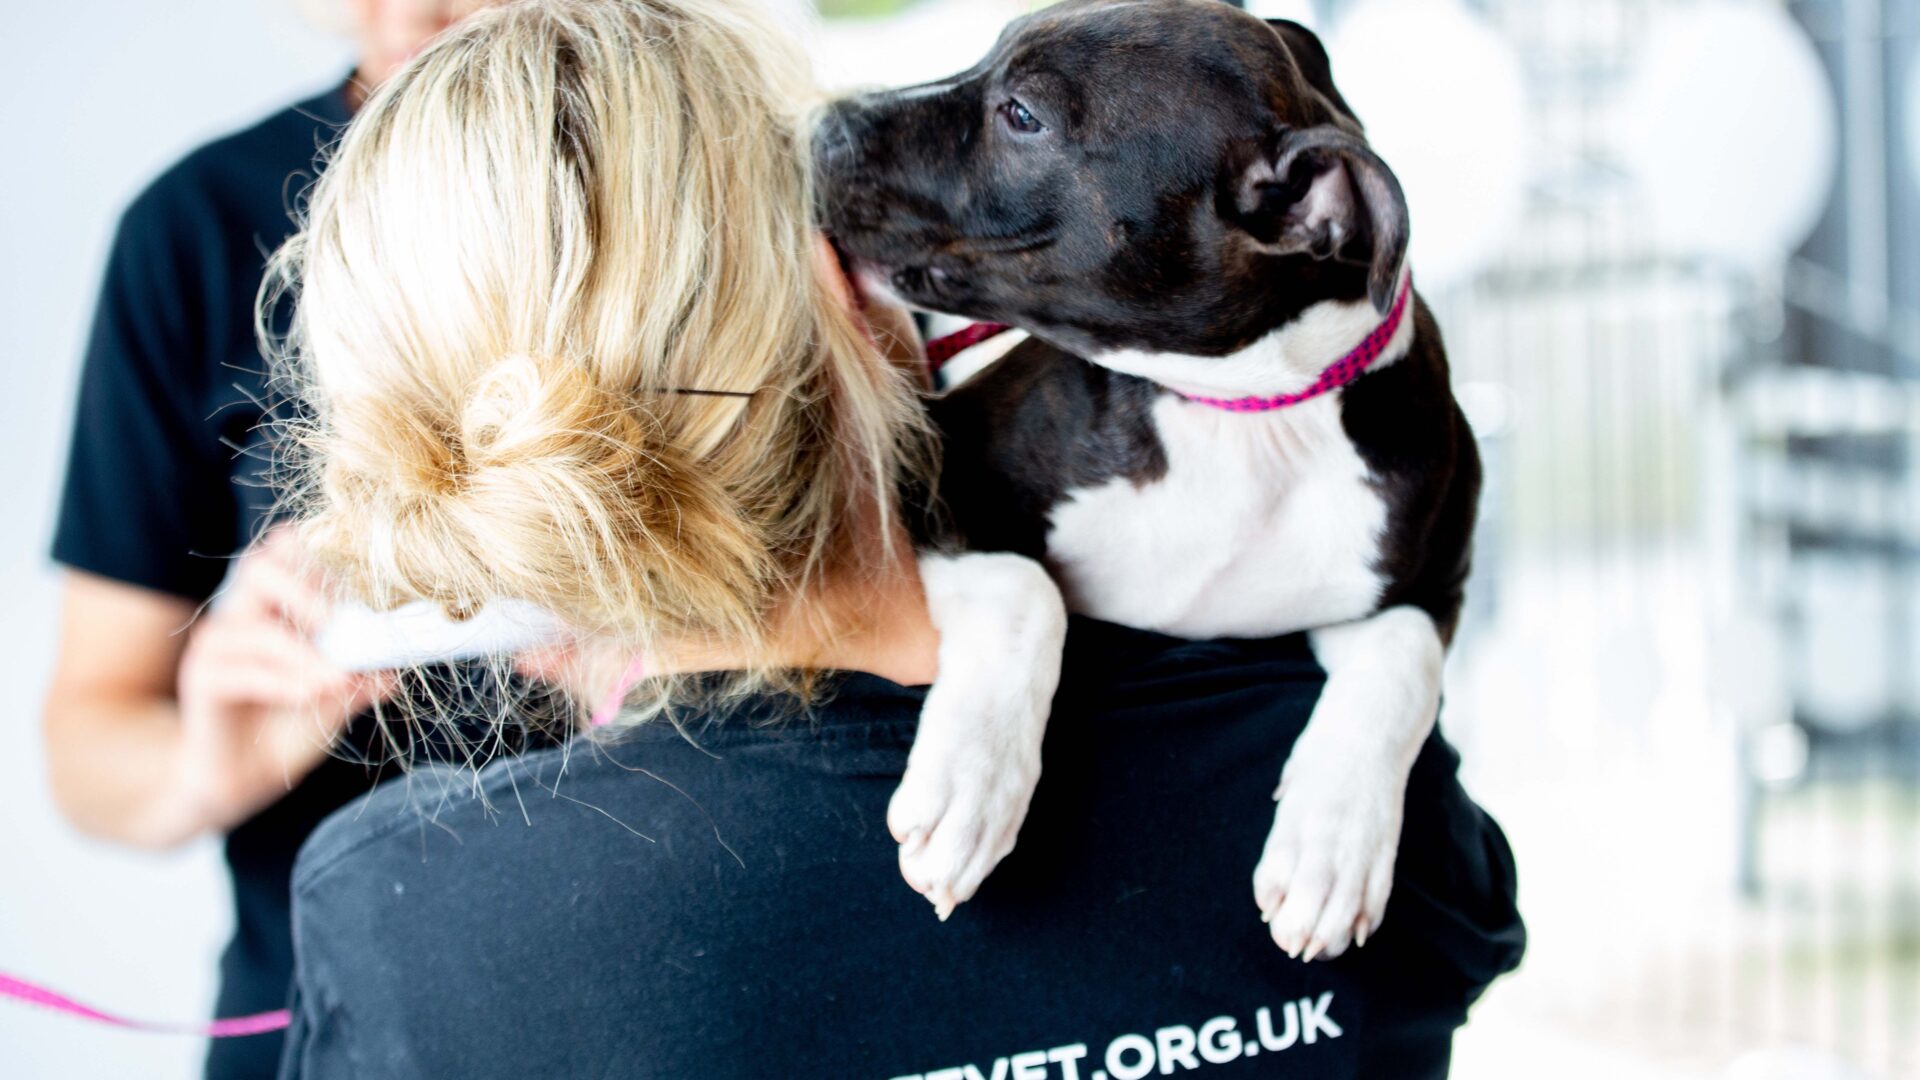 VetPartners’ boost to charity helping homeless people and their pets